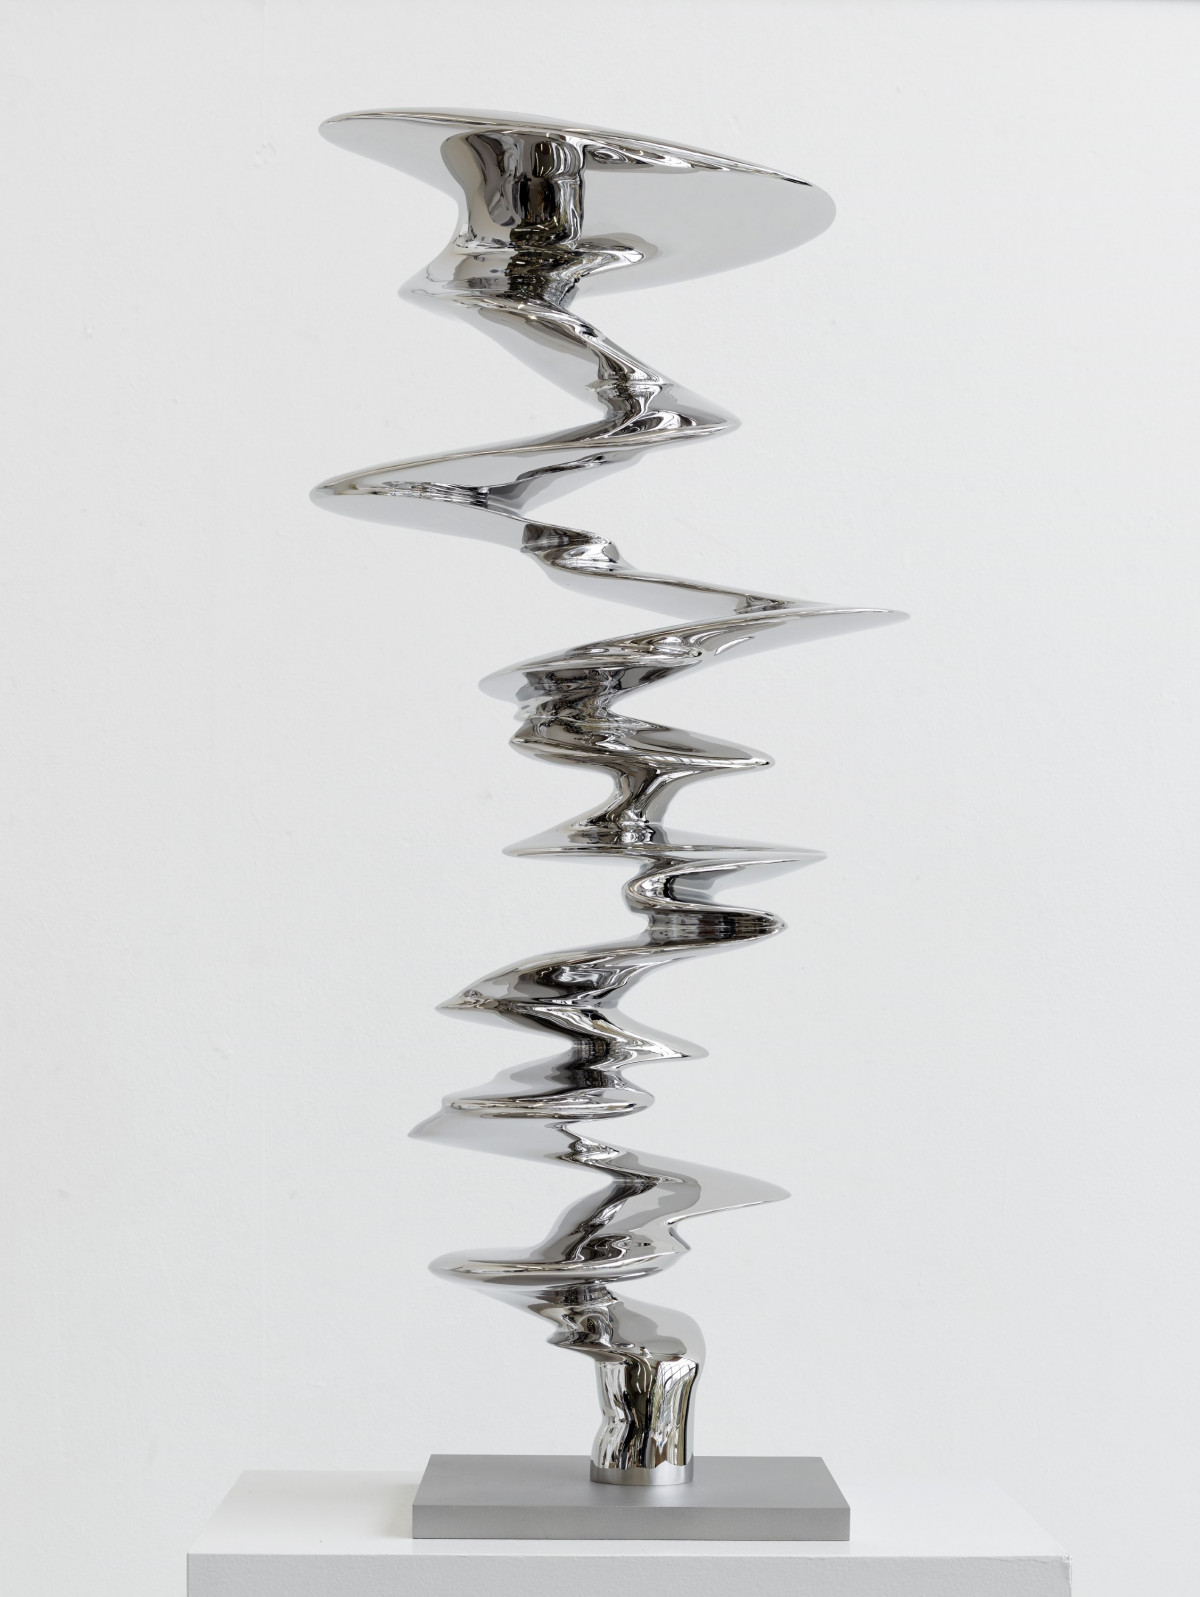 Tony Cragg, ‘Stages’, 2022